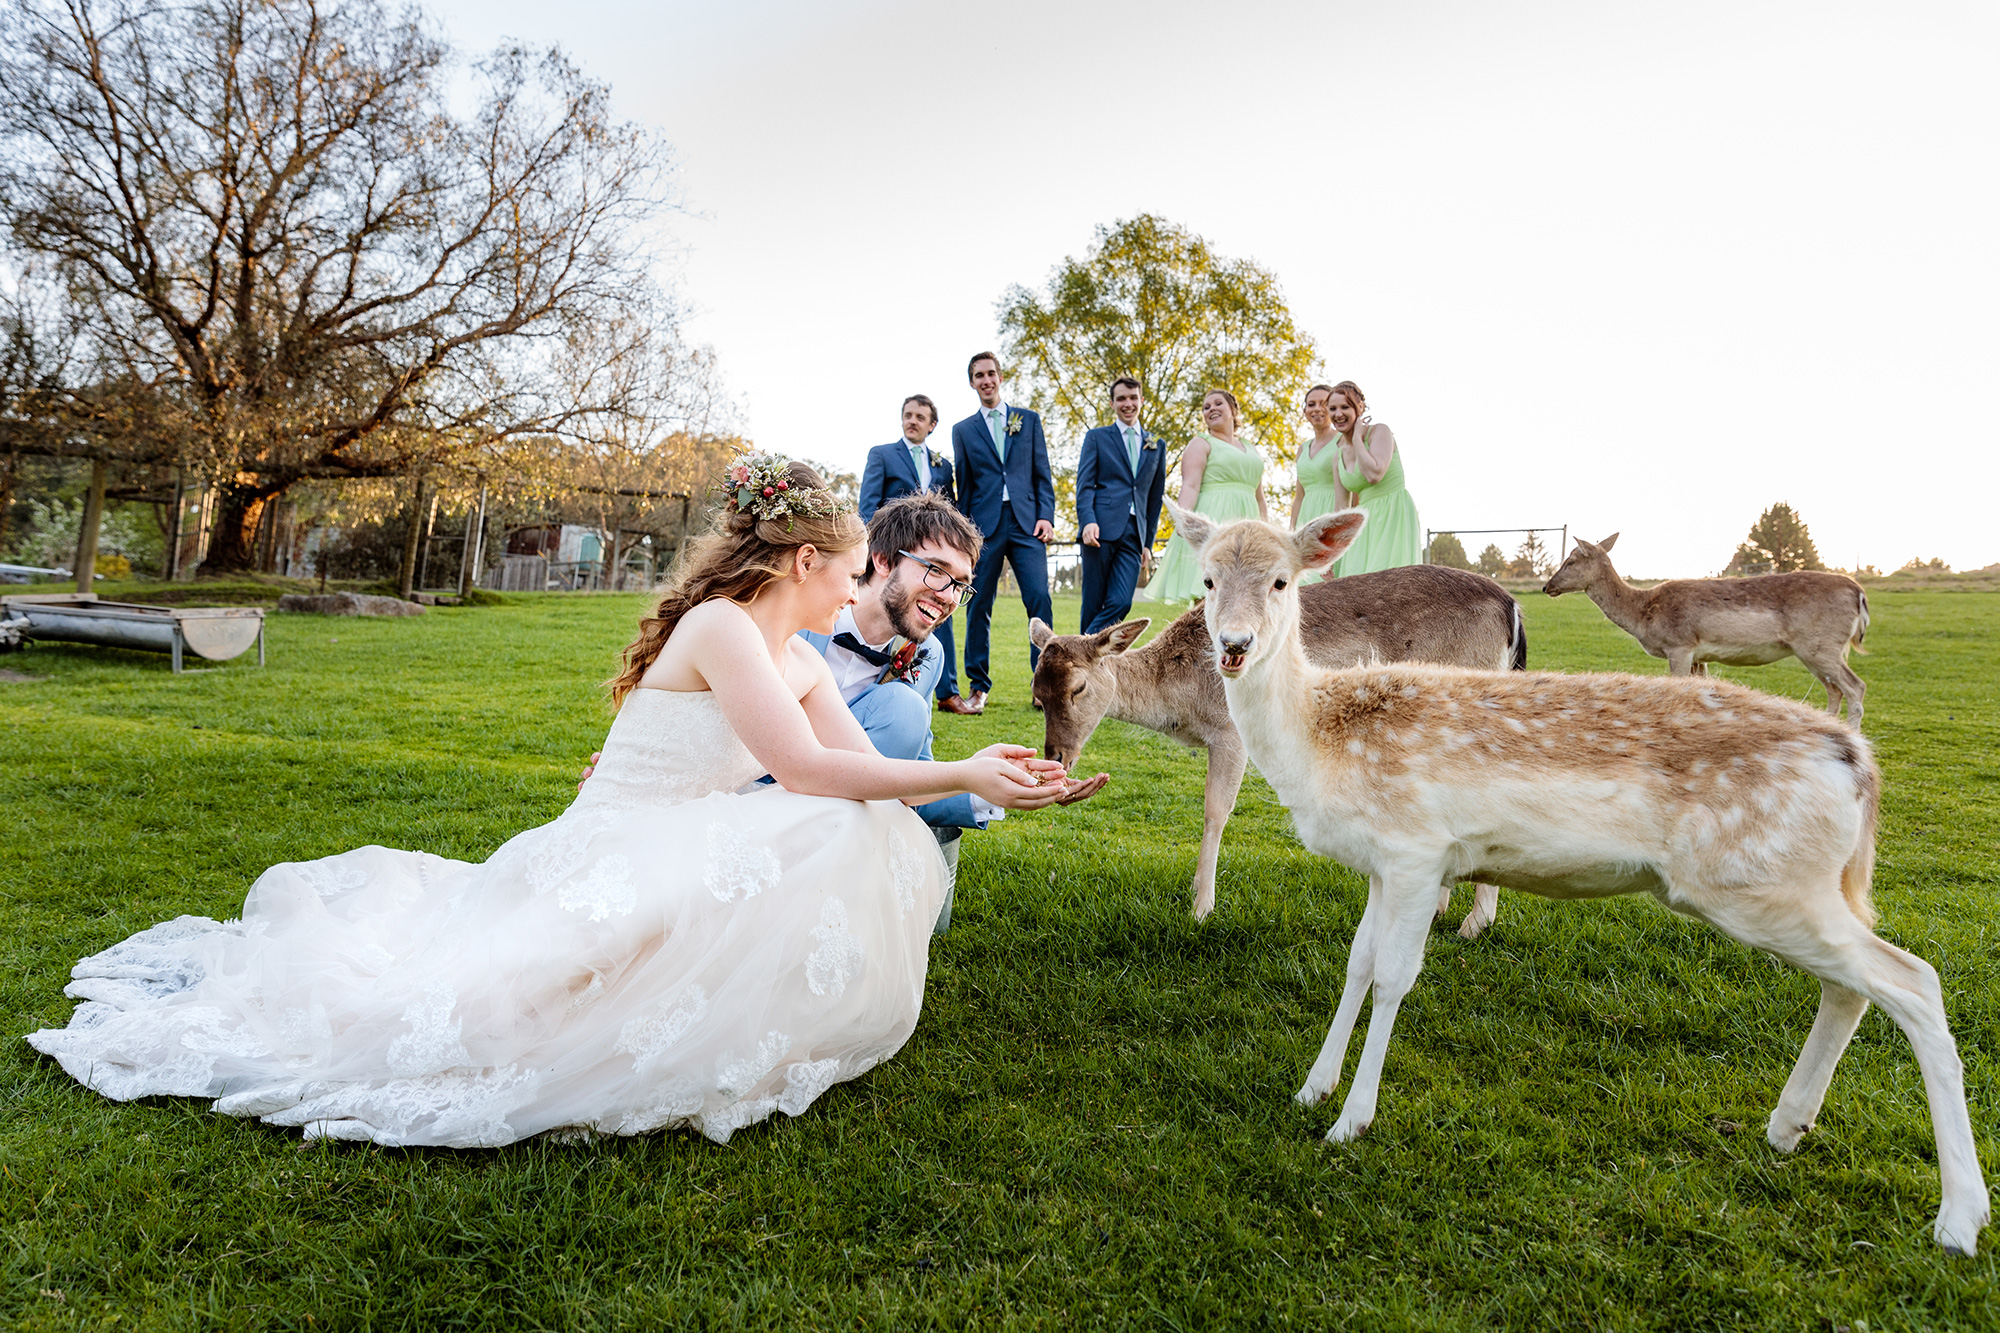 Stacey_Andrew_Rustic-Farm-Wedding_Alan-Rogers-Photography_036